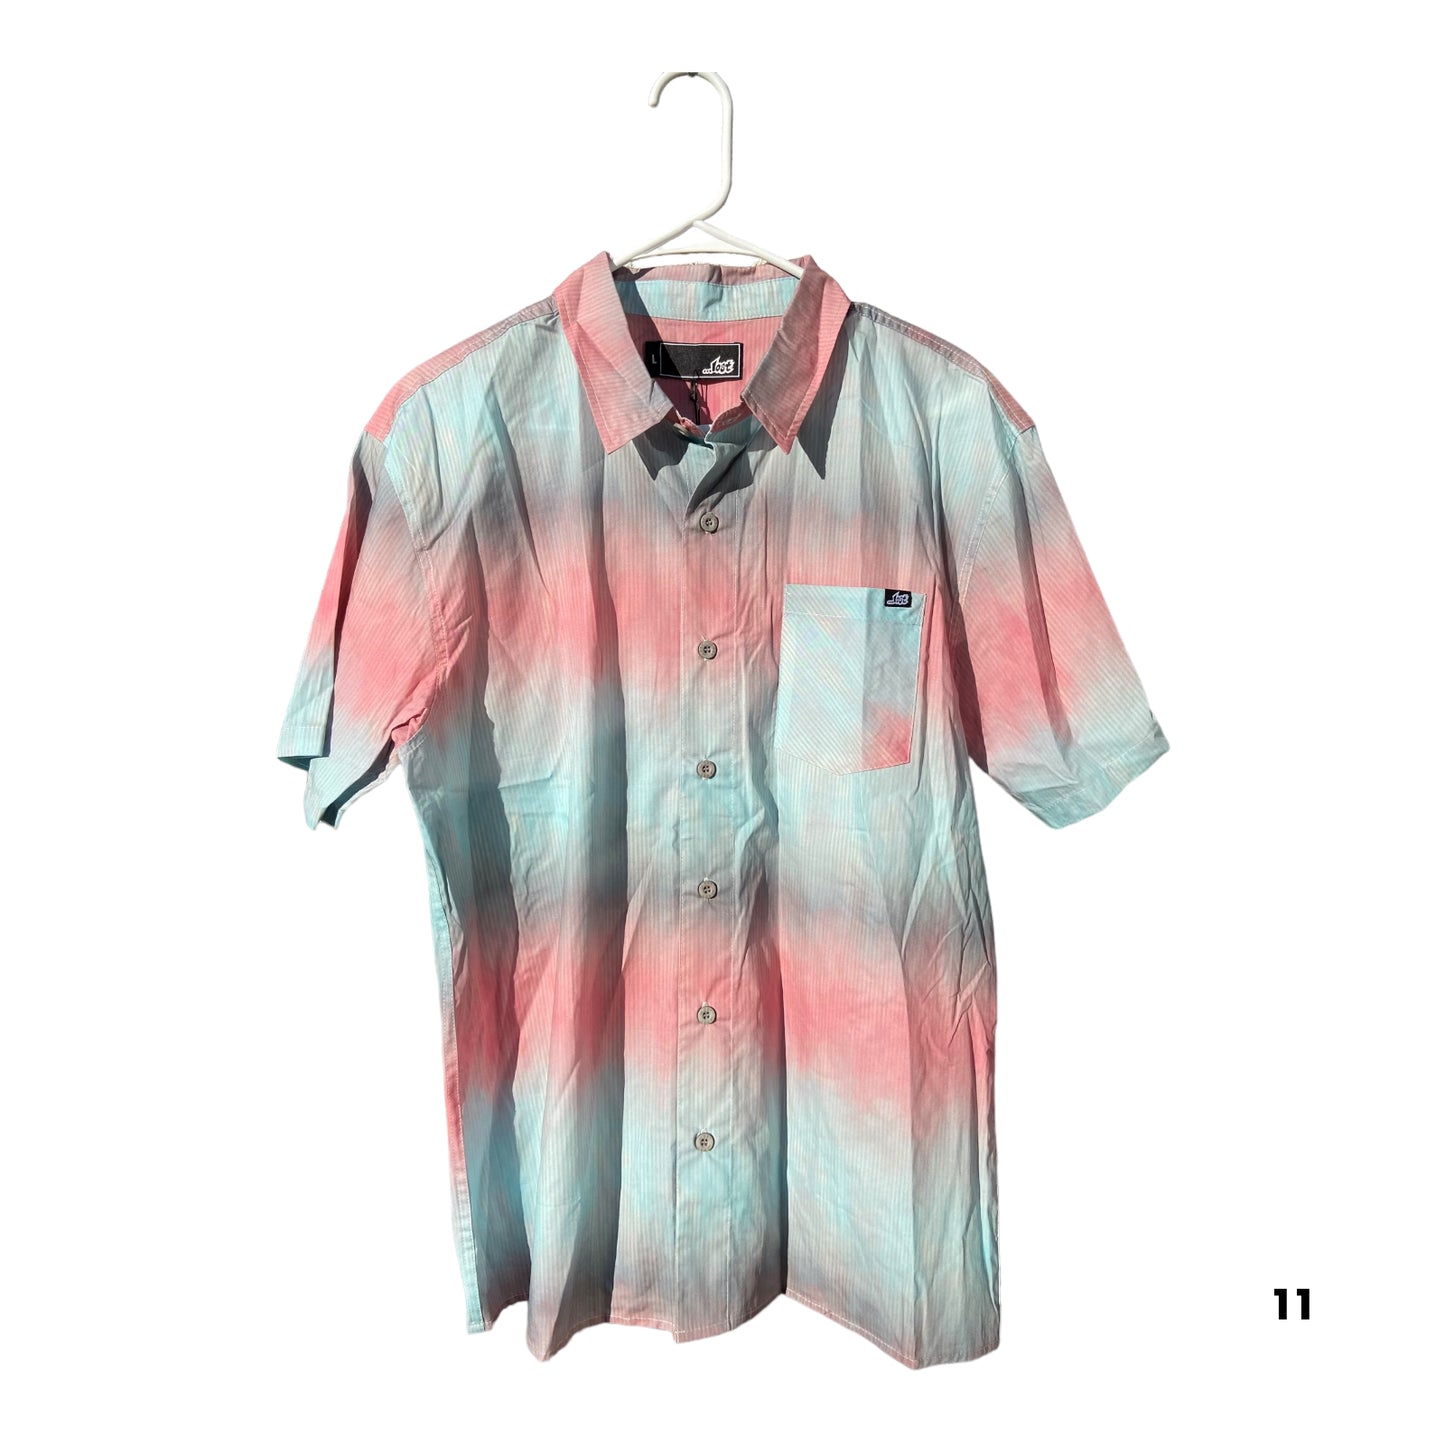 LOST New Mens Large Button-ups Dead Stock FREE SHIPPING